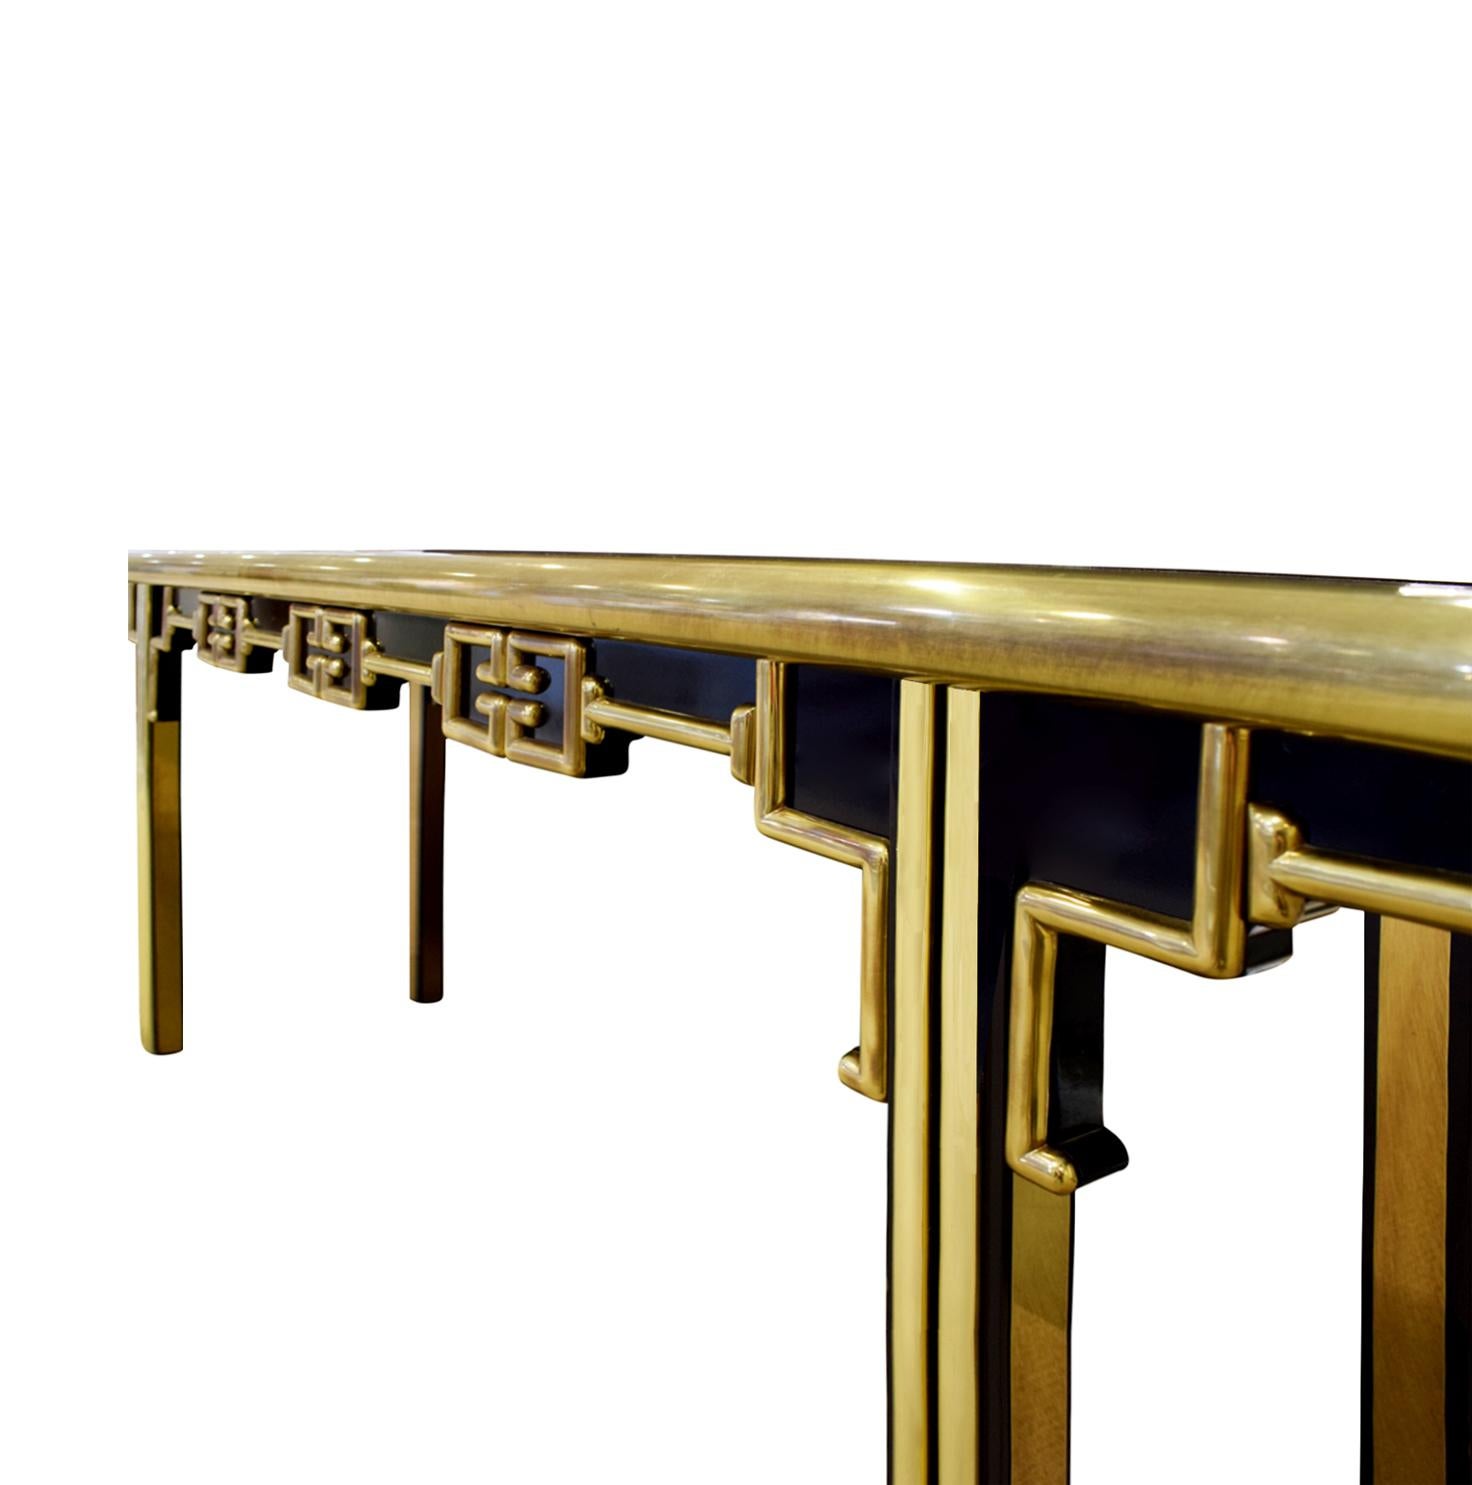 American Mastercraft Exceptional Greek Key Console 1960s 'Signed' For Sale